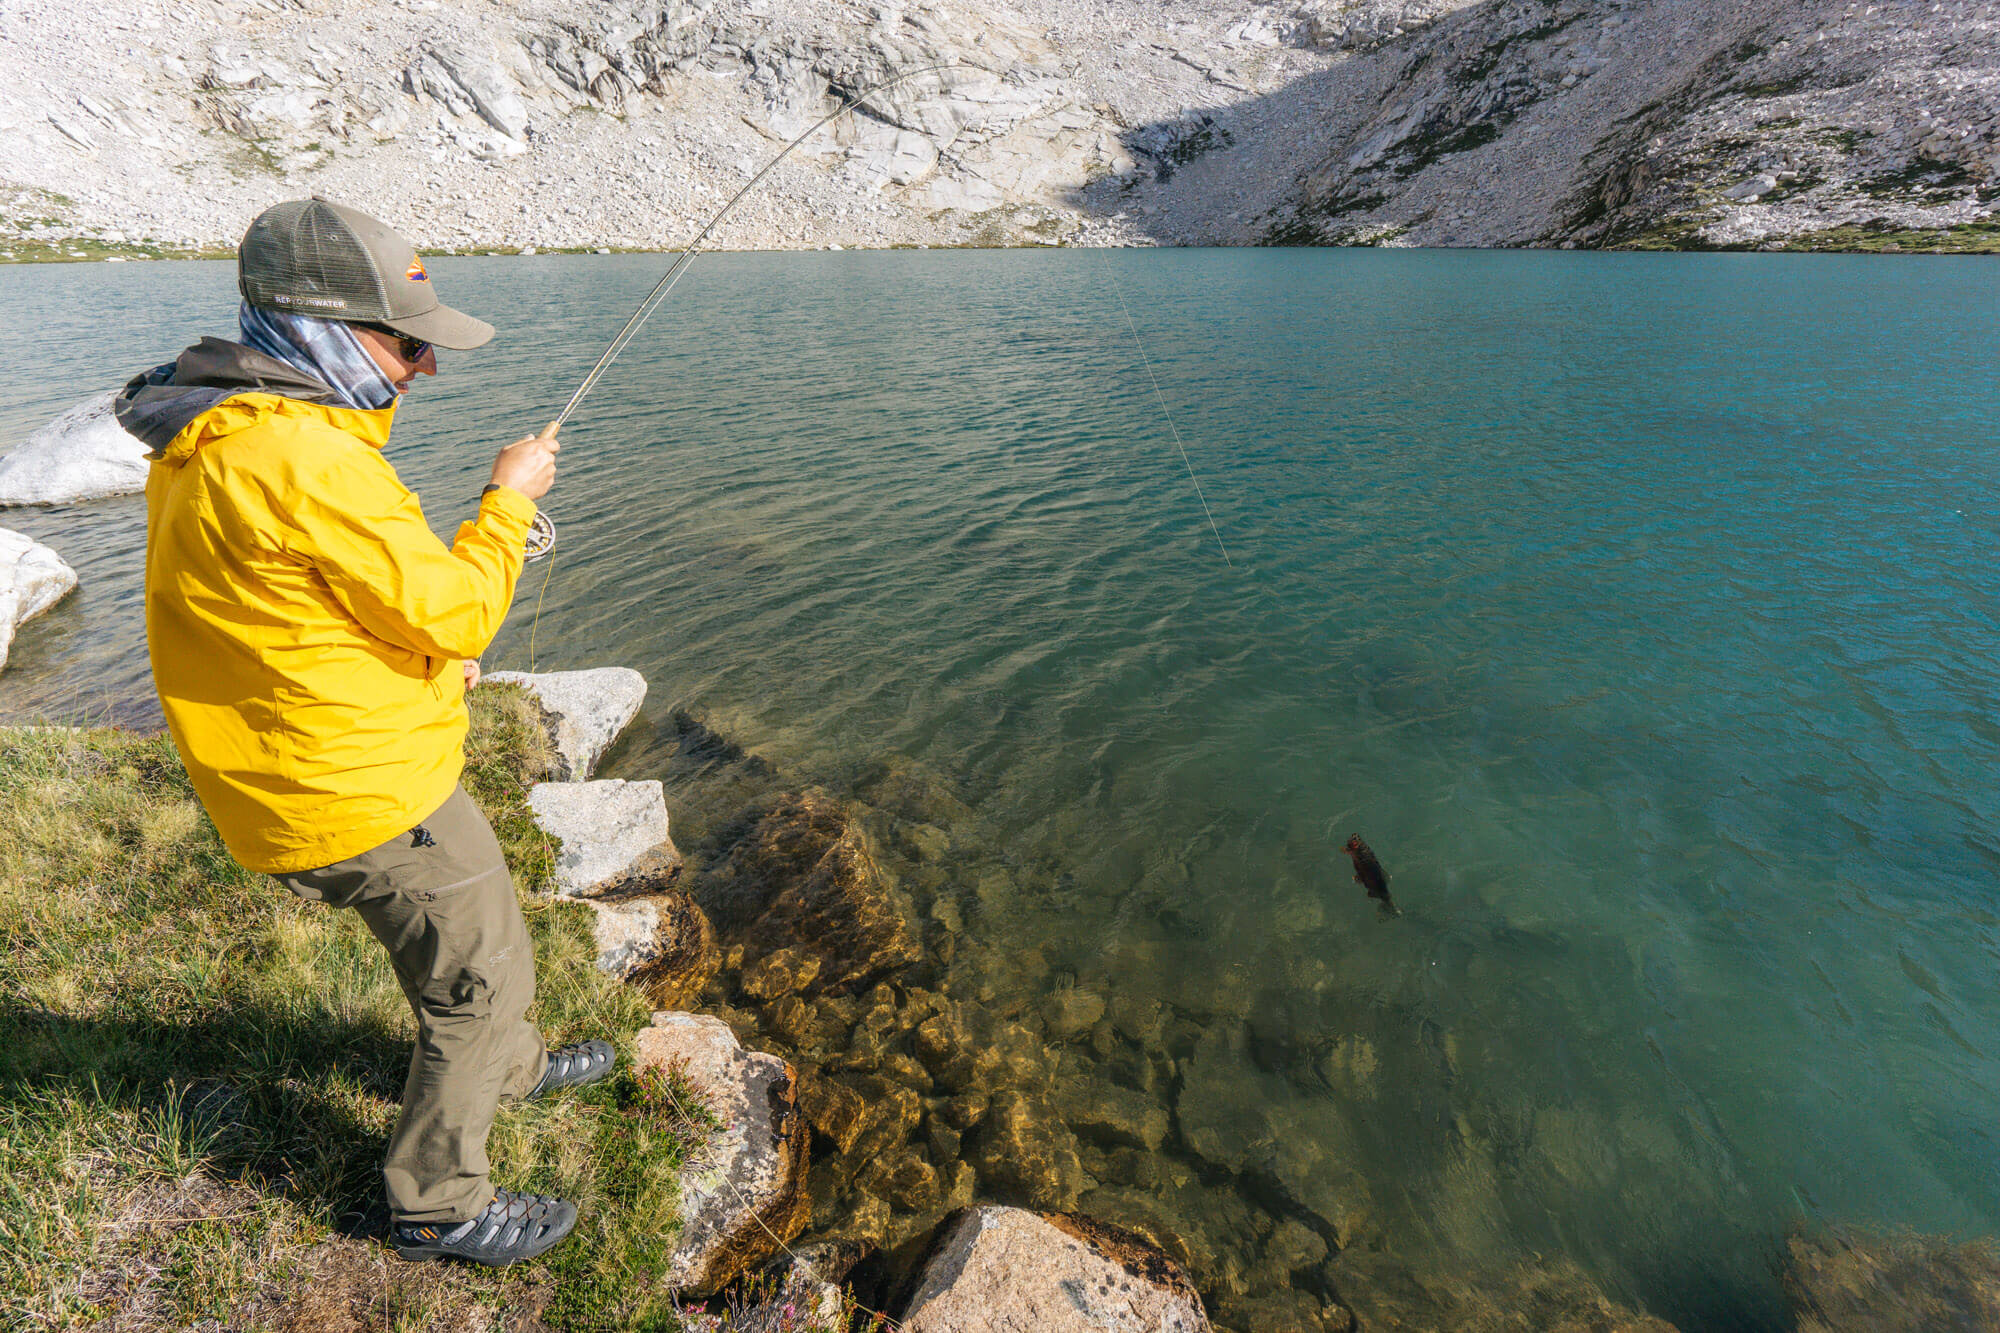 Backpacking in the John Muir Wilderness for Golden Trout